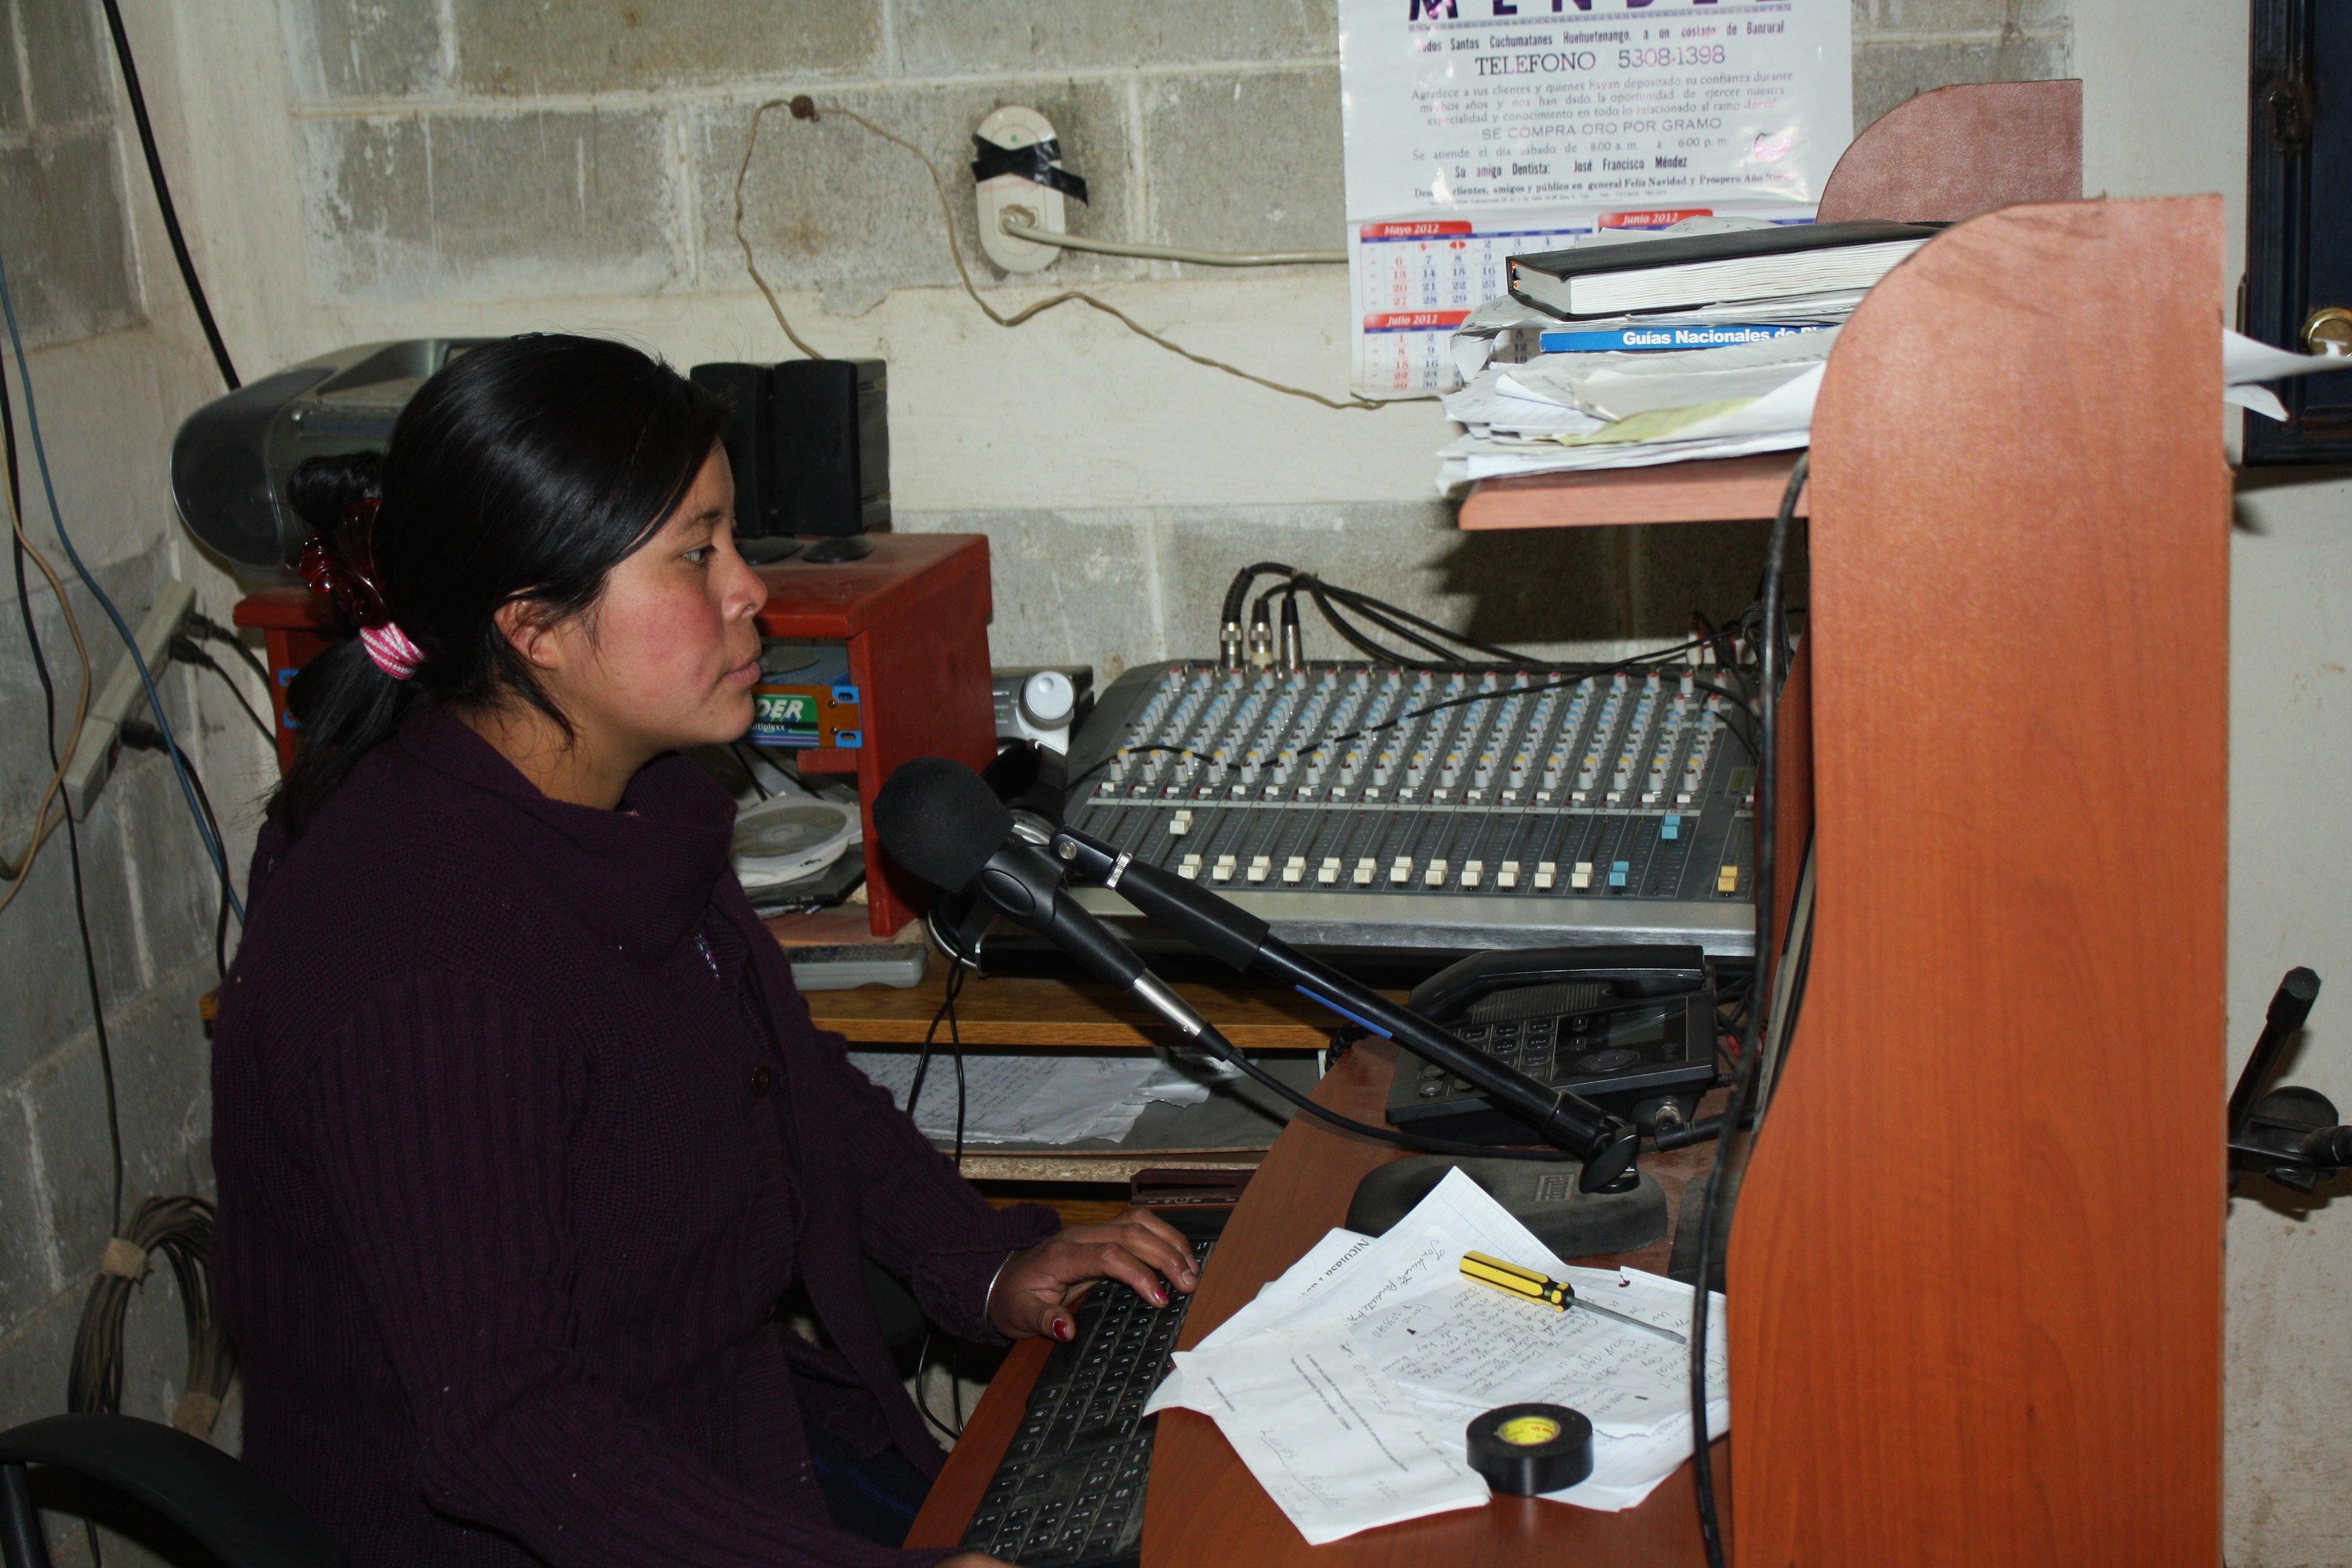 Nicolasa Pablo, 23, gives a broadcast on women’s rights in Mam. Women have thanked her for changing the mentality of their husbands through her broadcasts, Nicolasa says. (Photo by: Brenna Goth)